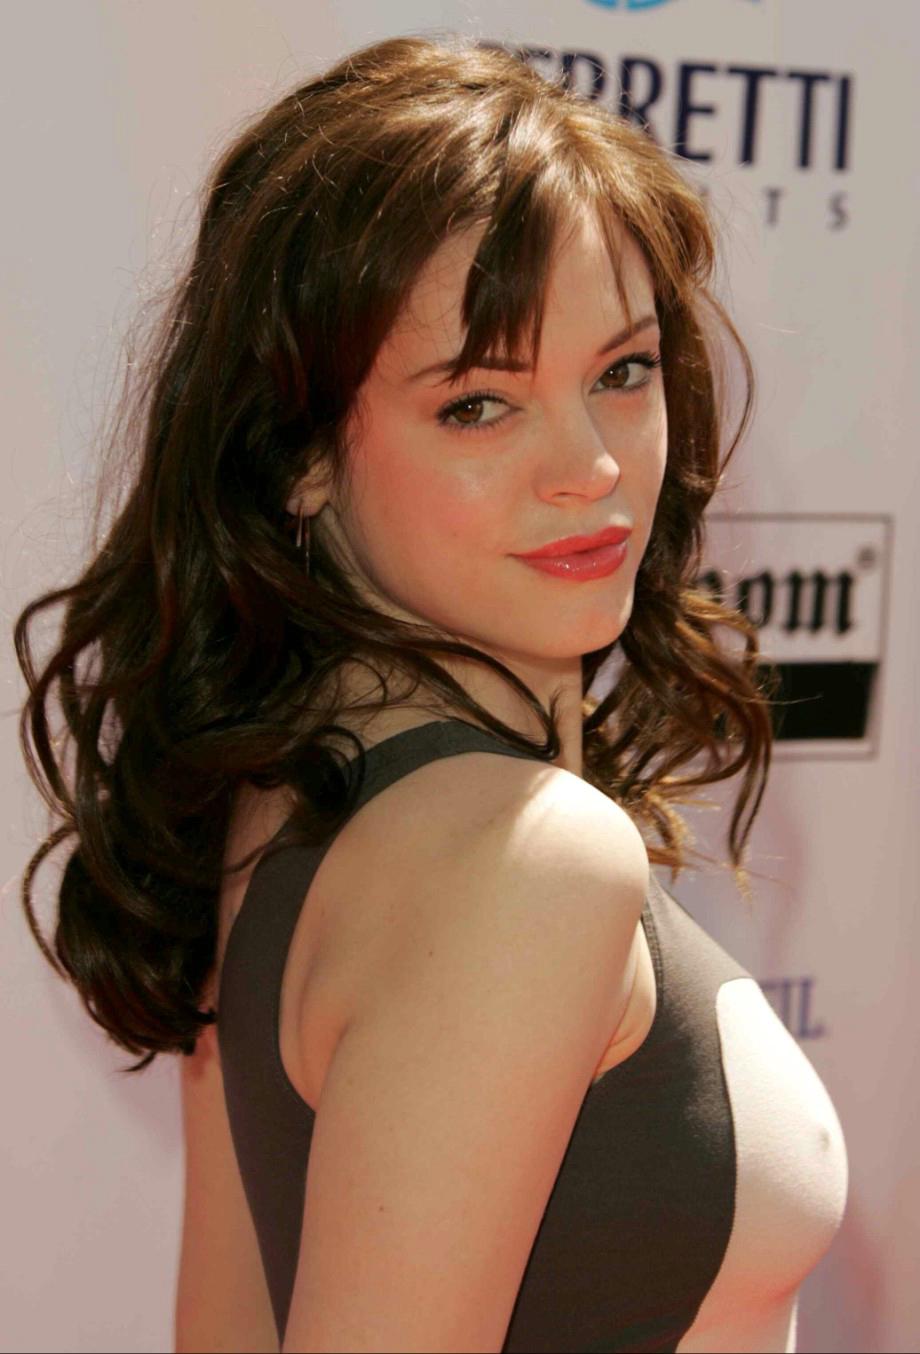 Rose Mcgowan Profile And Latest Pictures 2013 Hollywood Stars Hd